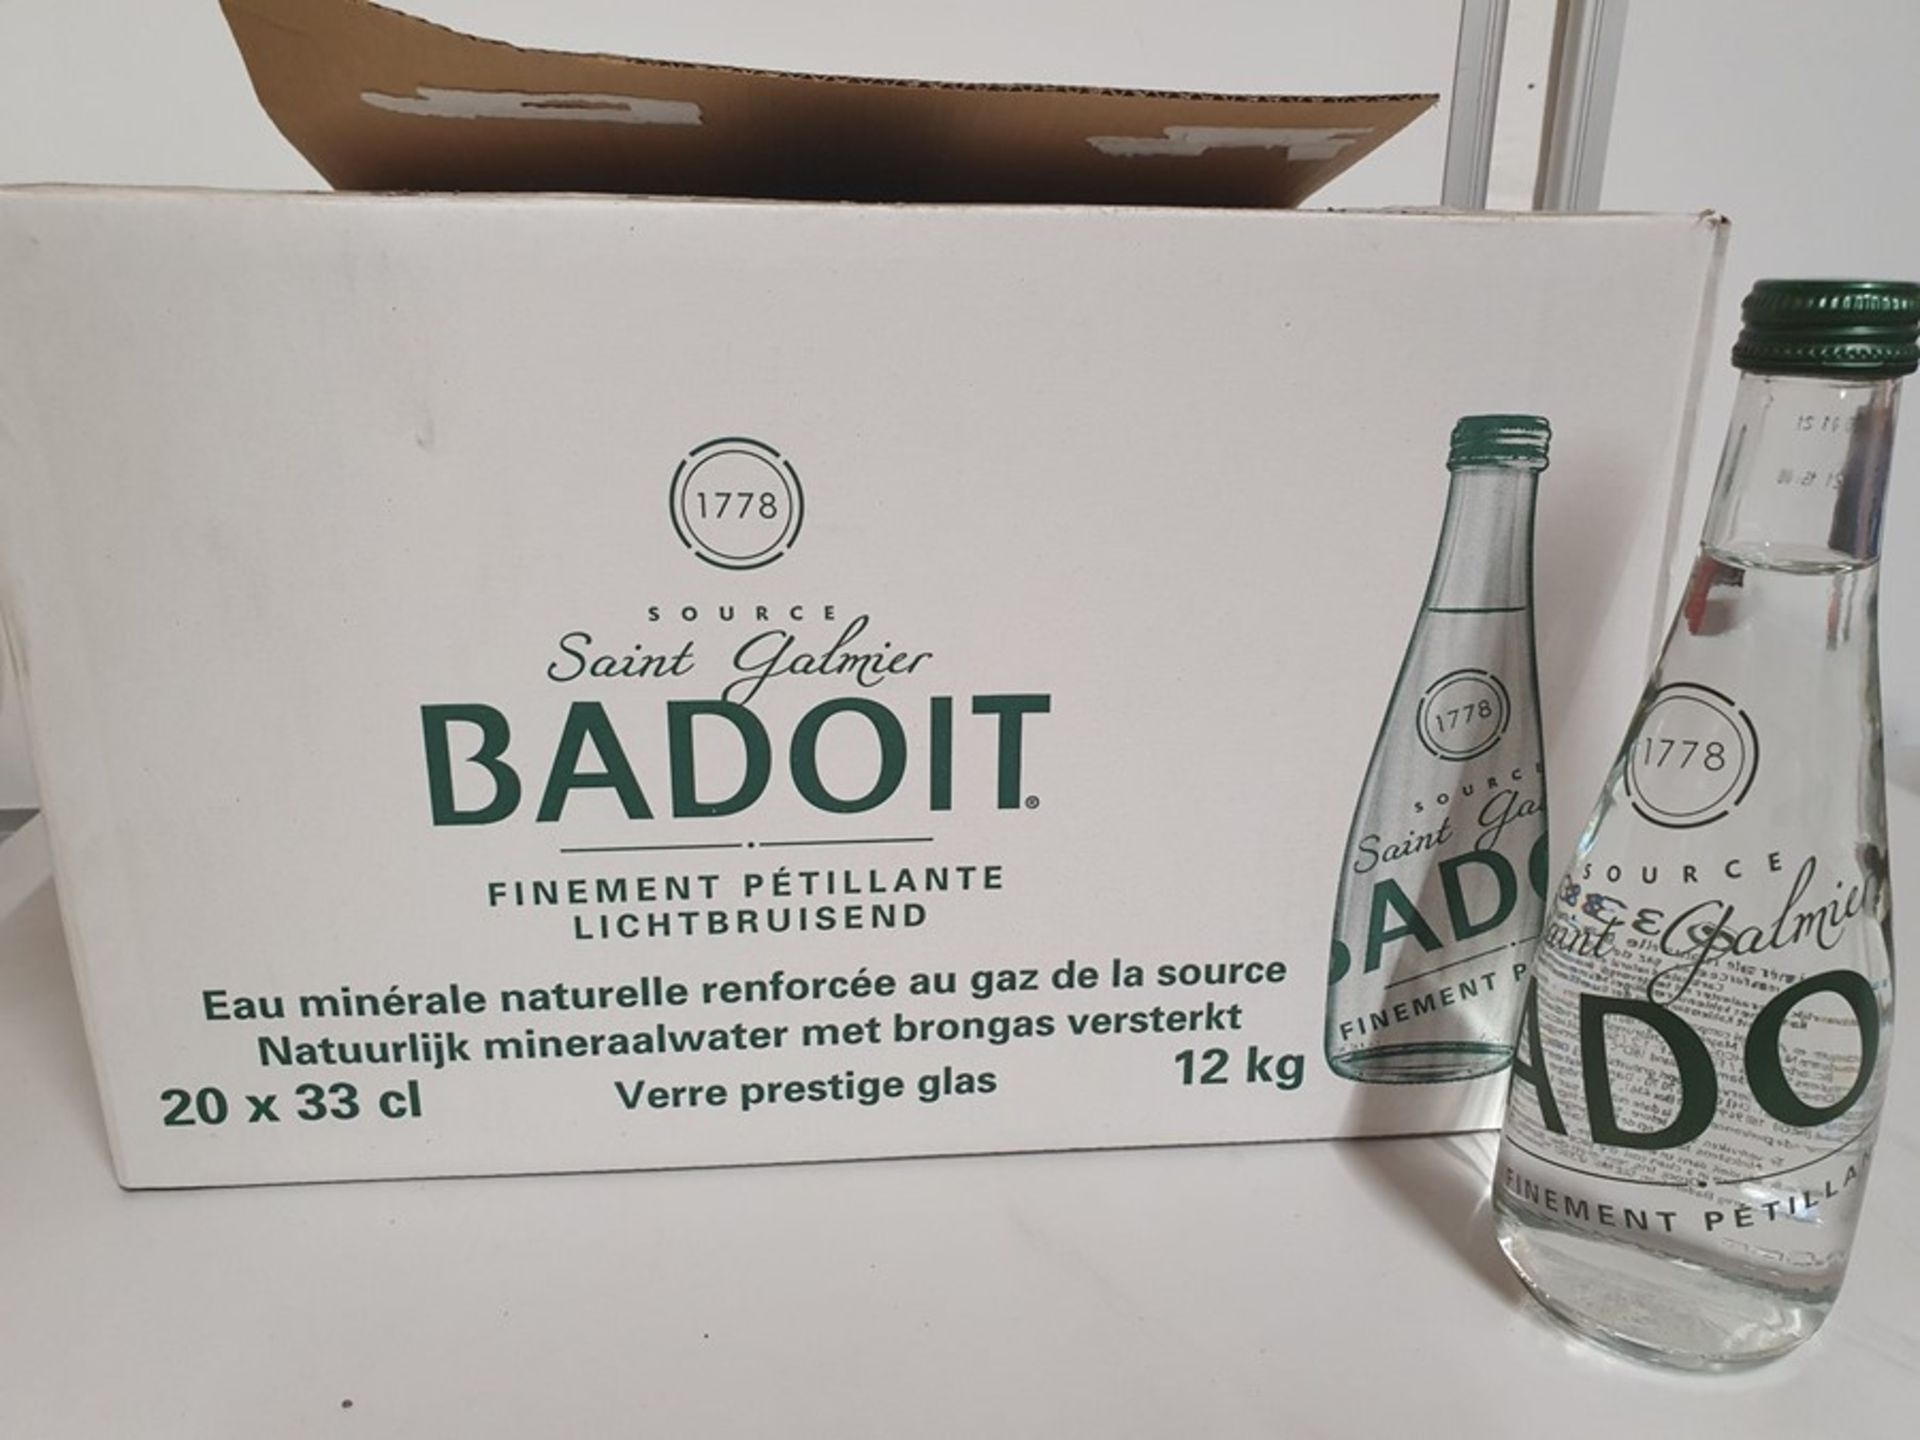 ONE LOT TO CONTAIN ONE BOX OF BADOIT NATURAL SPARKLING MINERAL WATER IN GLASS BOTTLES. 20 BOTTLES